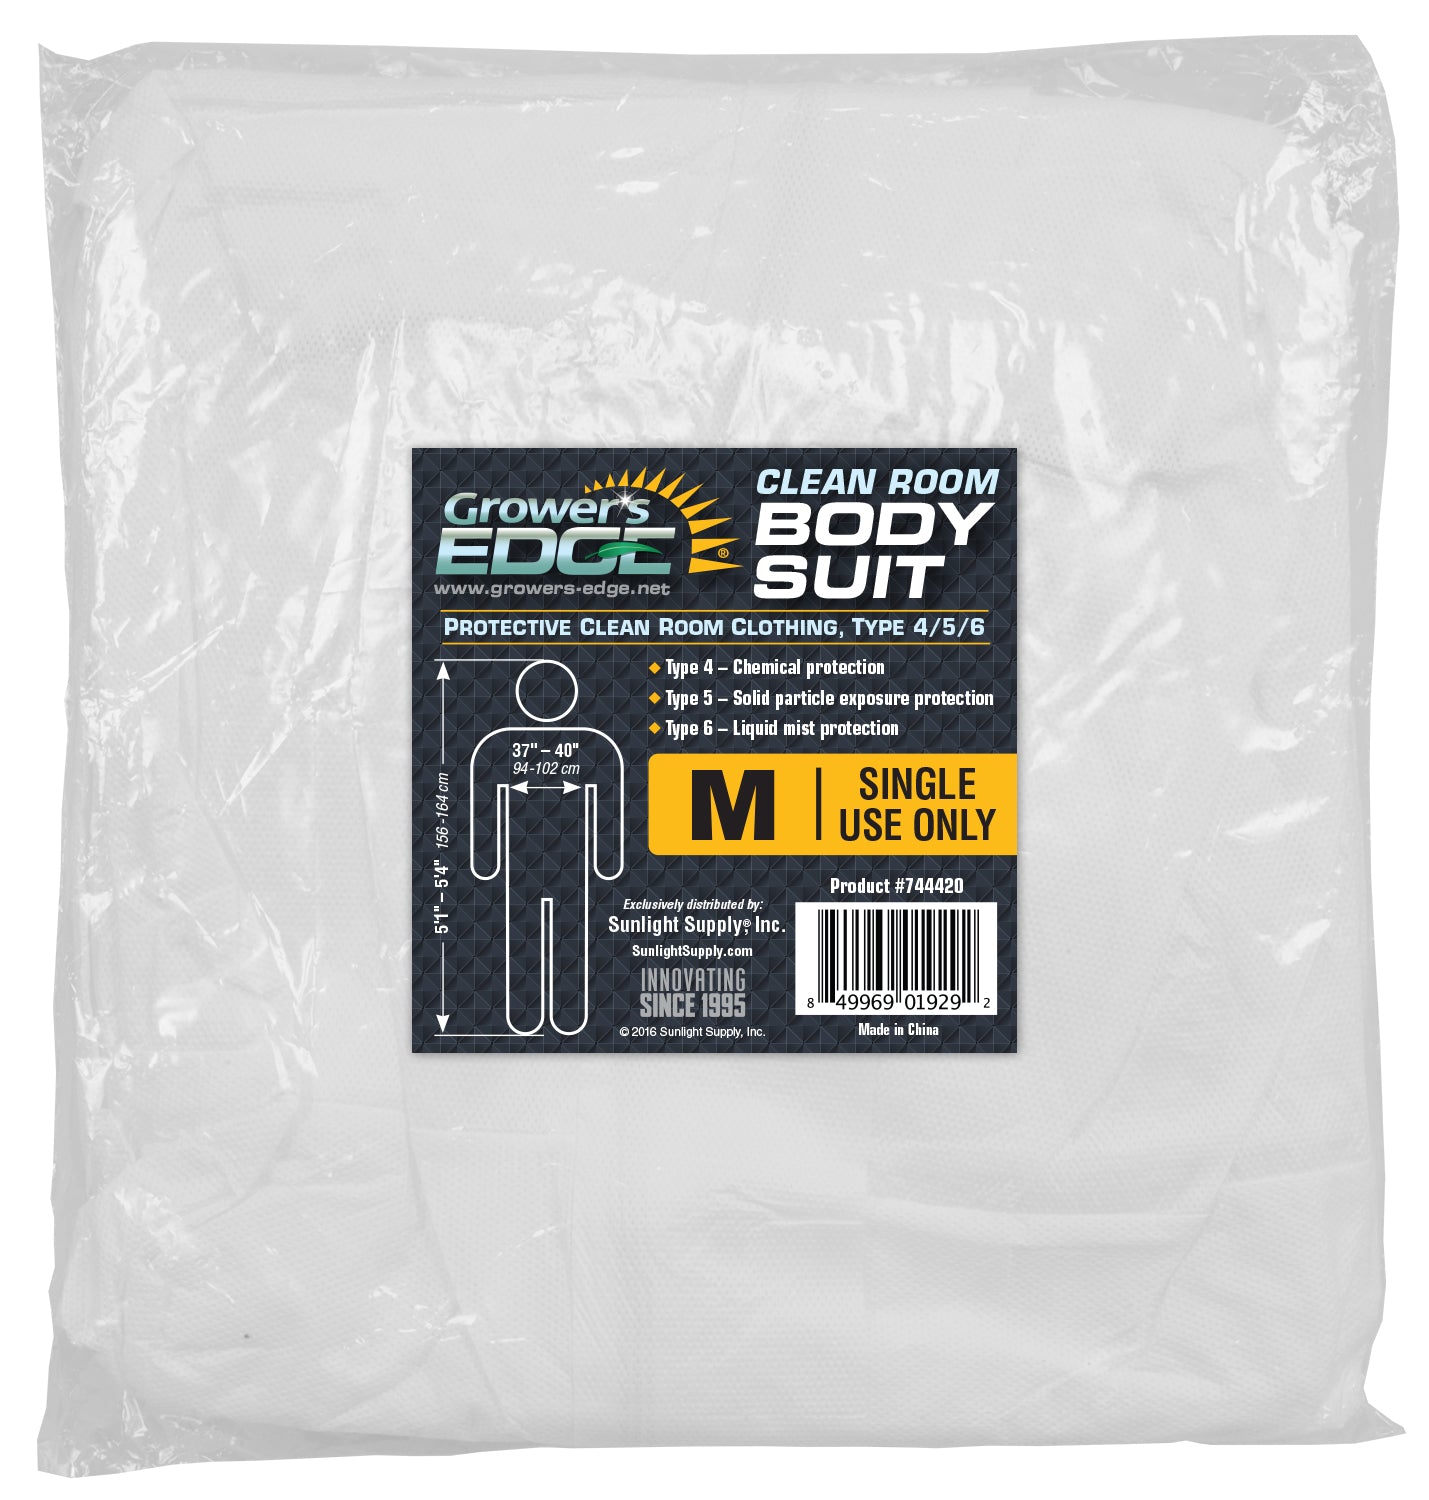 Grower's Edge Clean Room Body Suit - Size M 